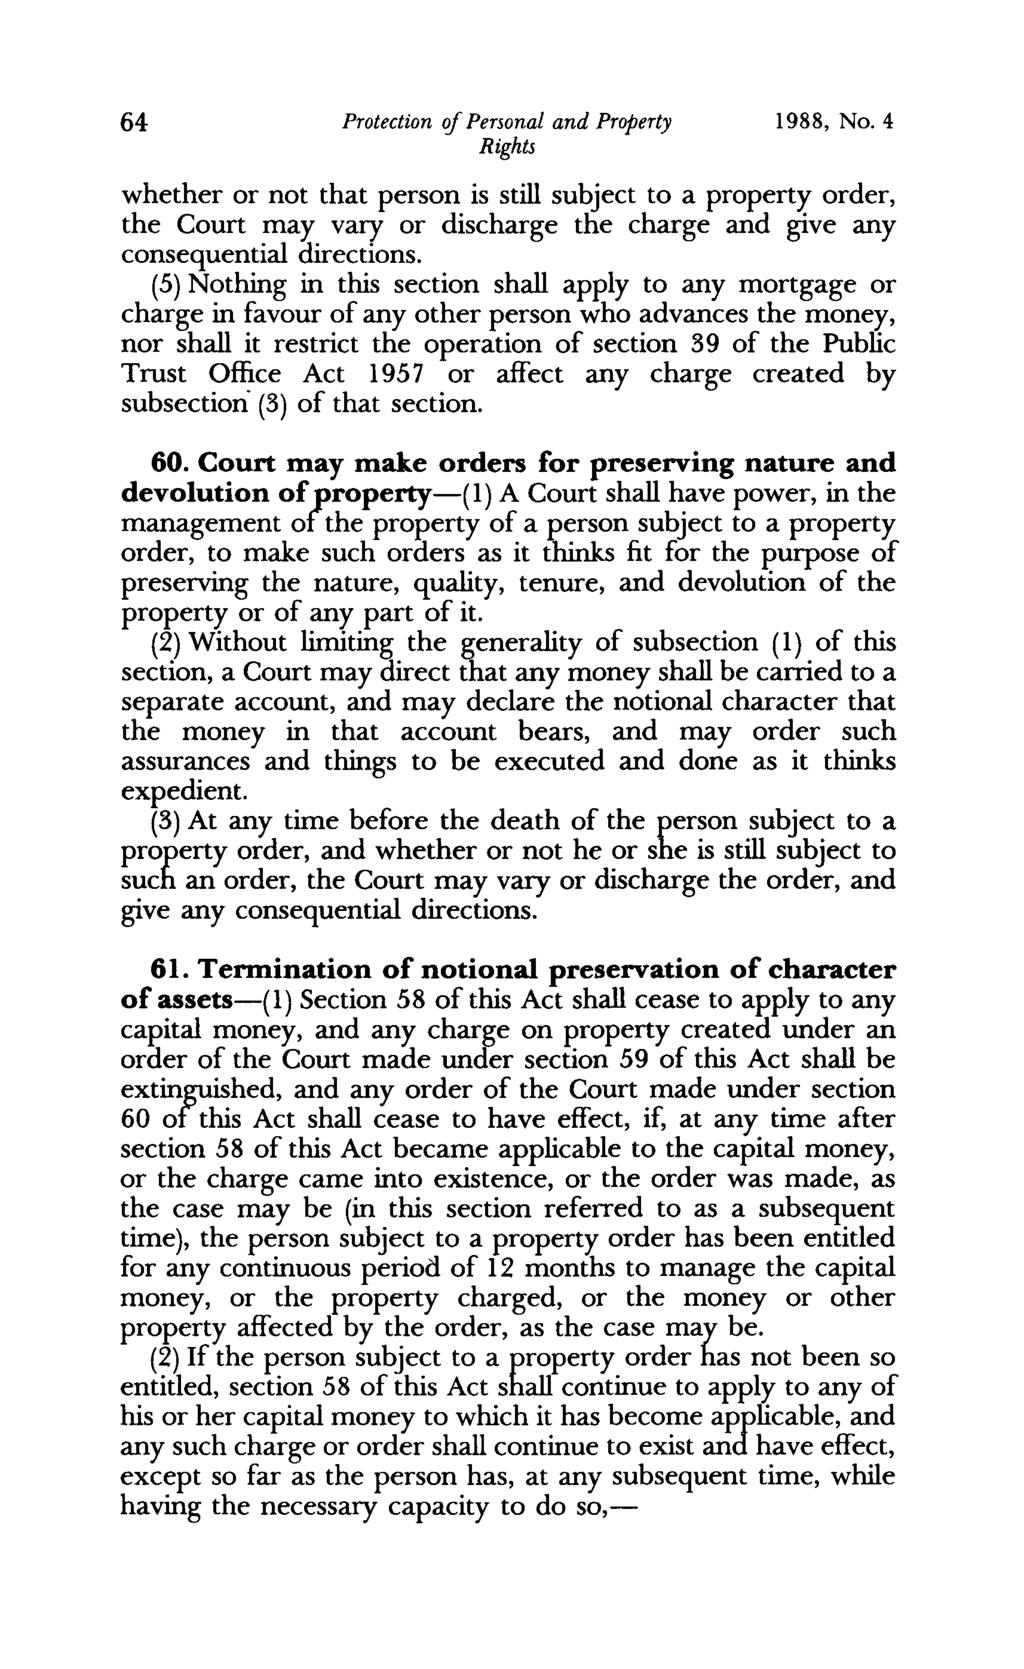 64 Protection 0/ Personal and Property 1988, No, 4 whether or not that person is still subject to a property order, the Court may vary or discharge the charge and give any consequential directions.